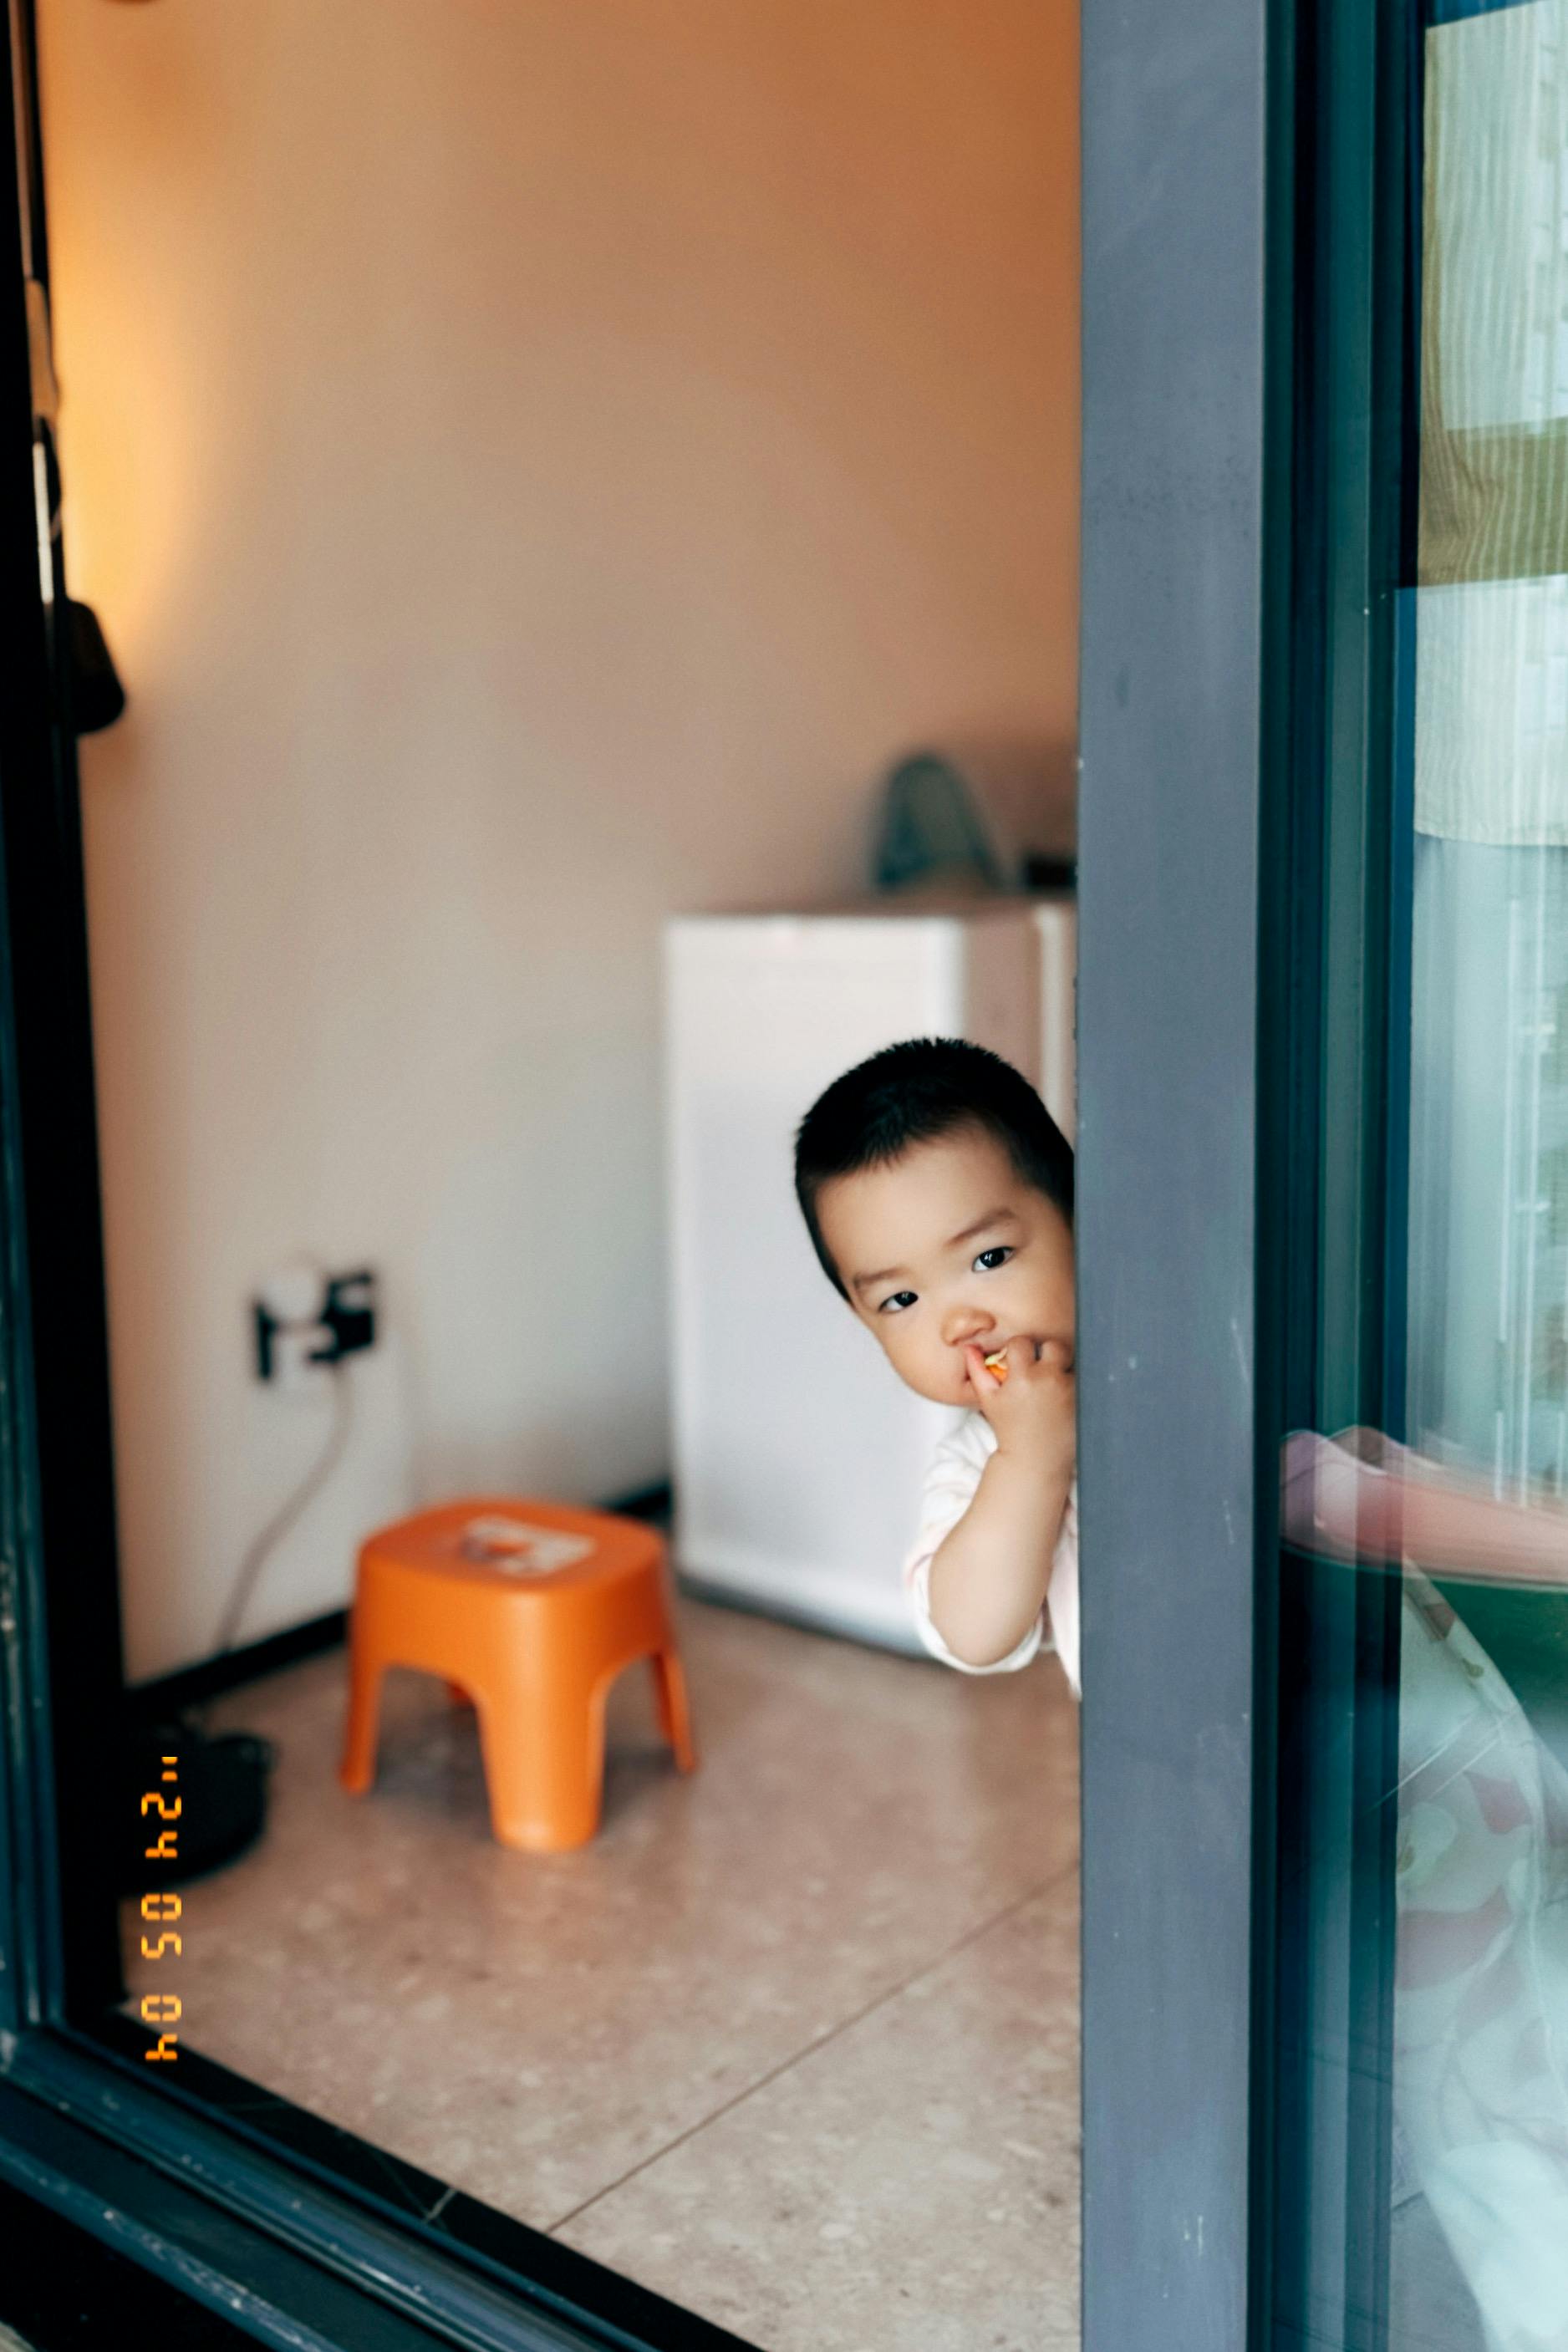 A curious child peeking out from behind a door, resting their head on their hand, with a small orange stool and a white refrigerator in the background